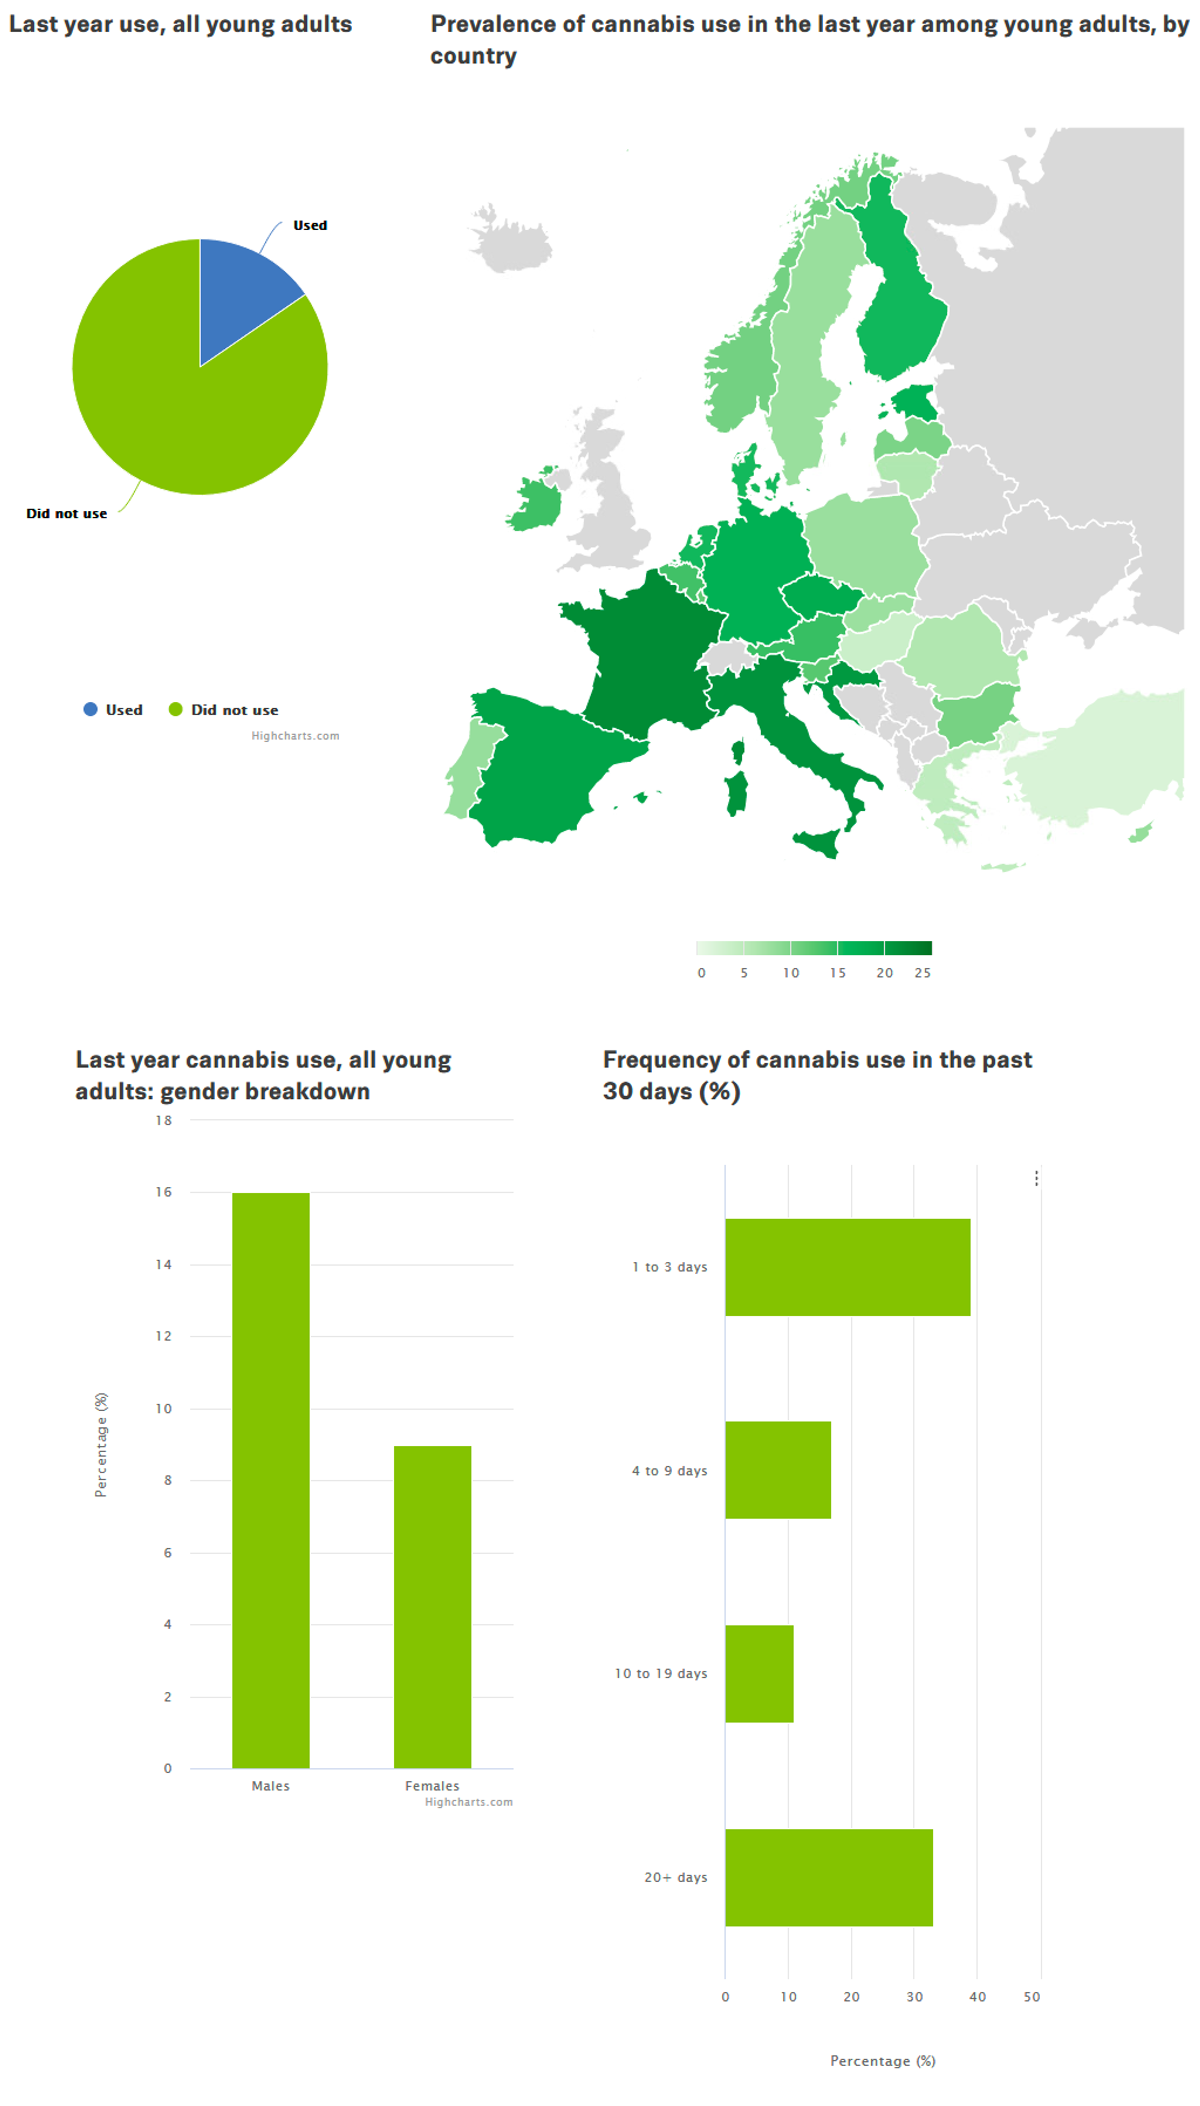 Some key cannabis prevalance use data for young adults in Europe. Less than 20% have used cannabis in the last year. There are wide variations between countries, from 2% to over 20%. More men report using than women. Frequency of use varies widely.